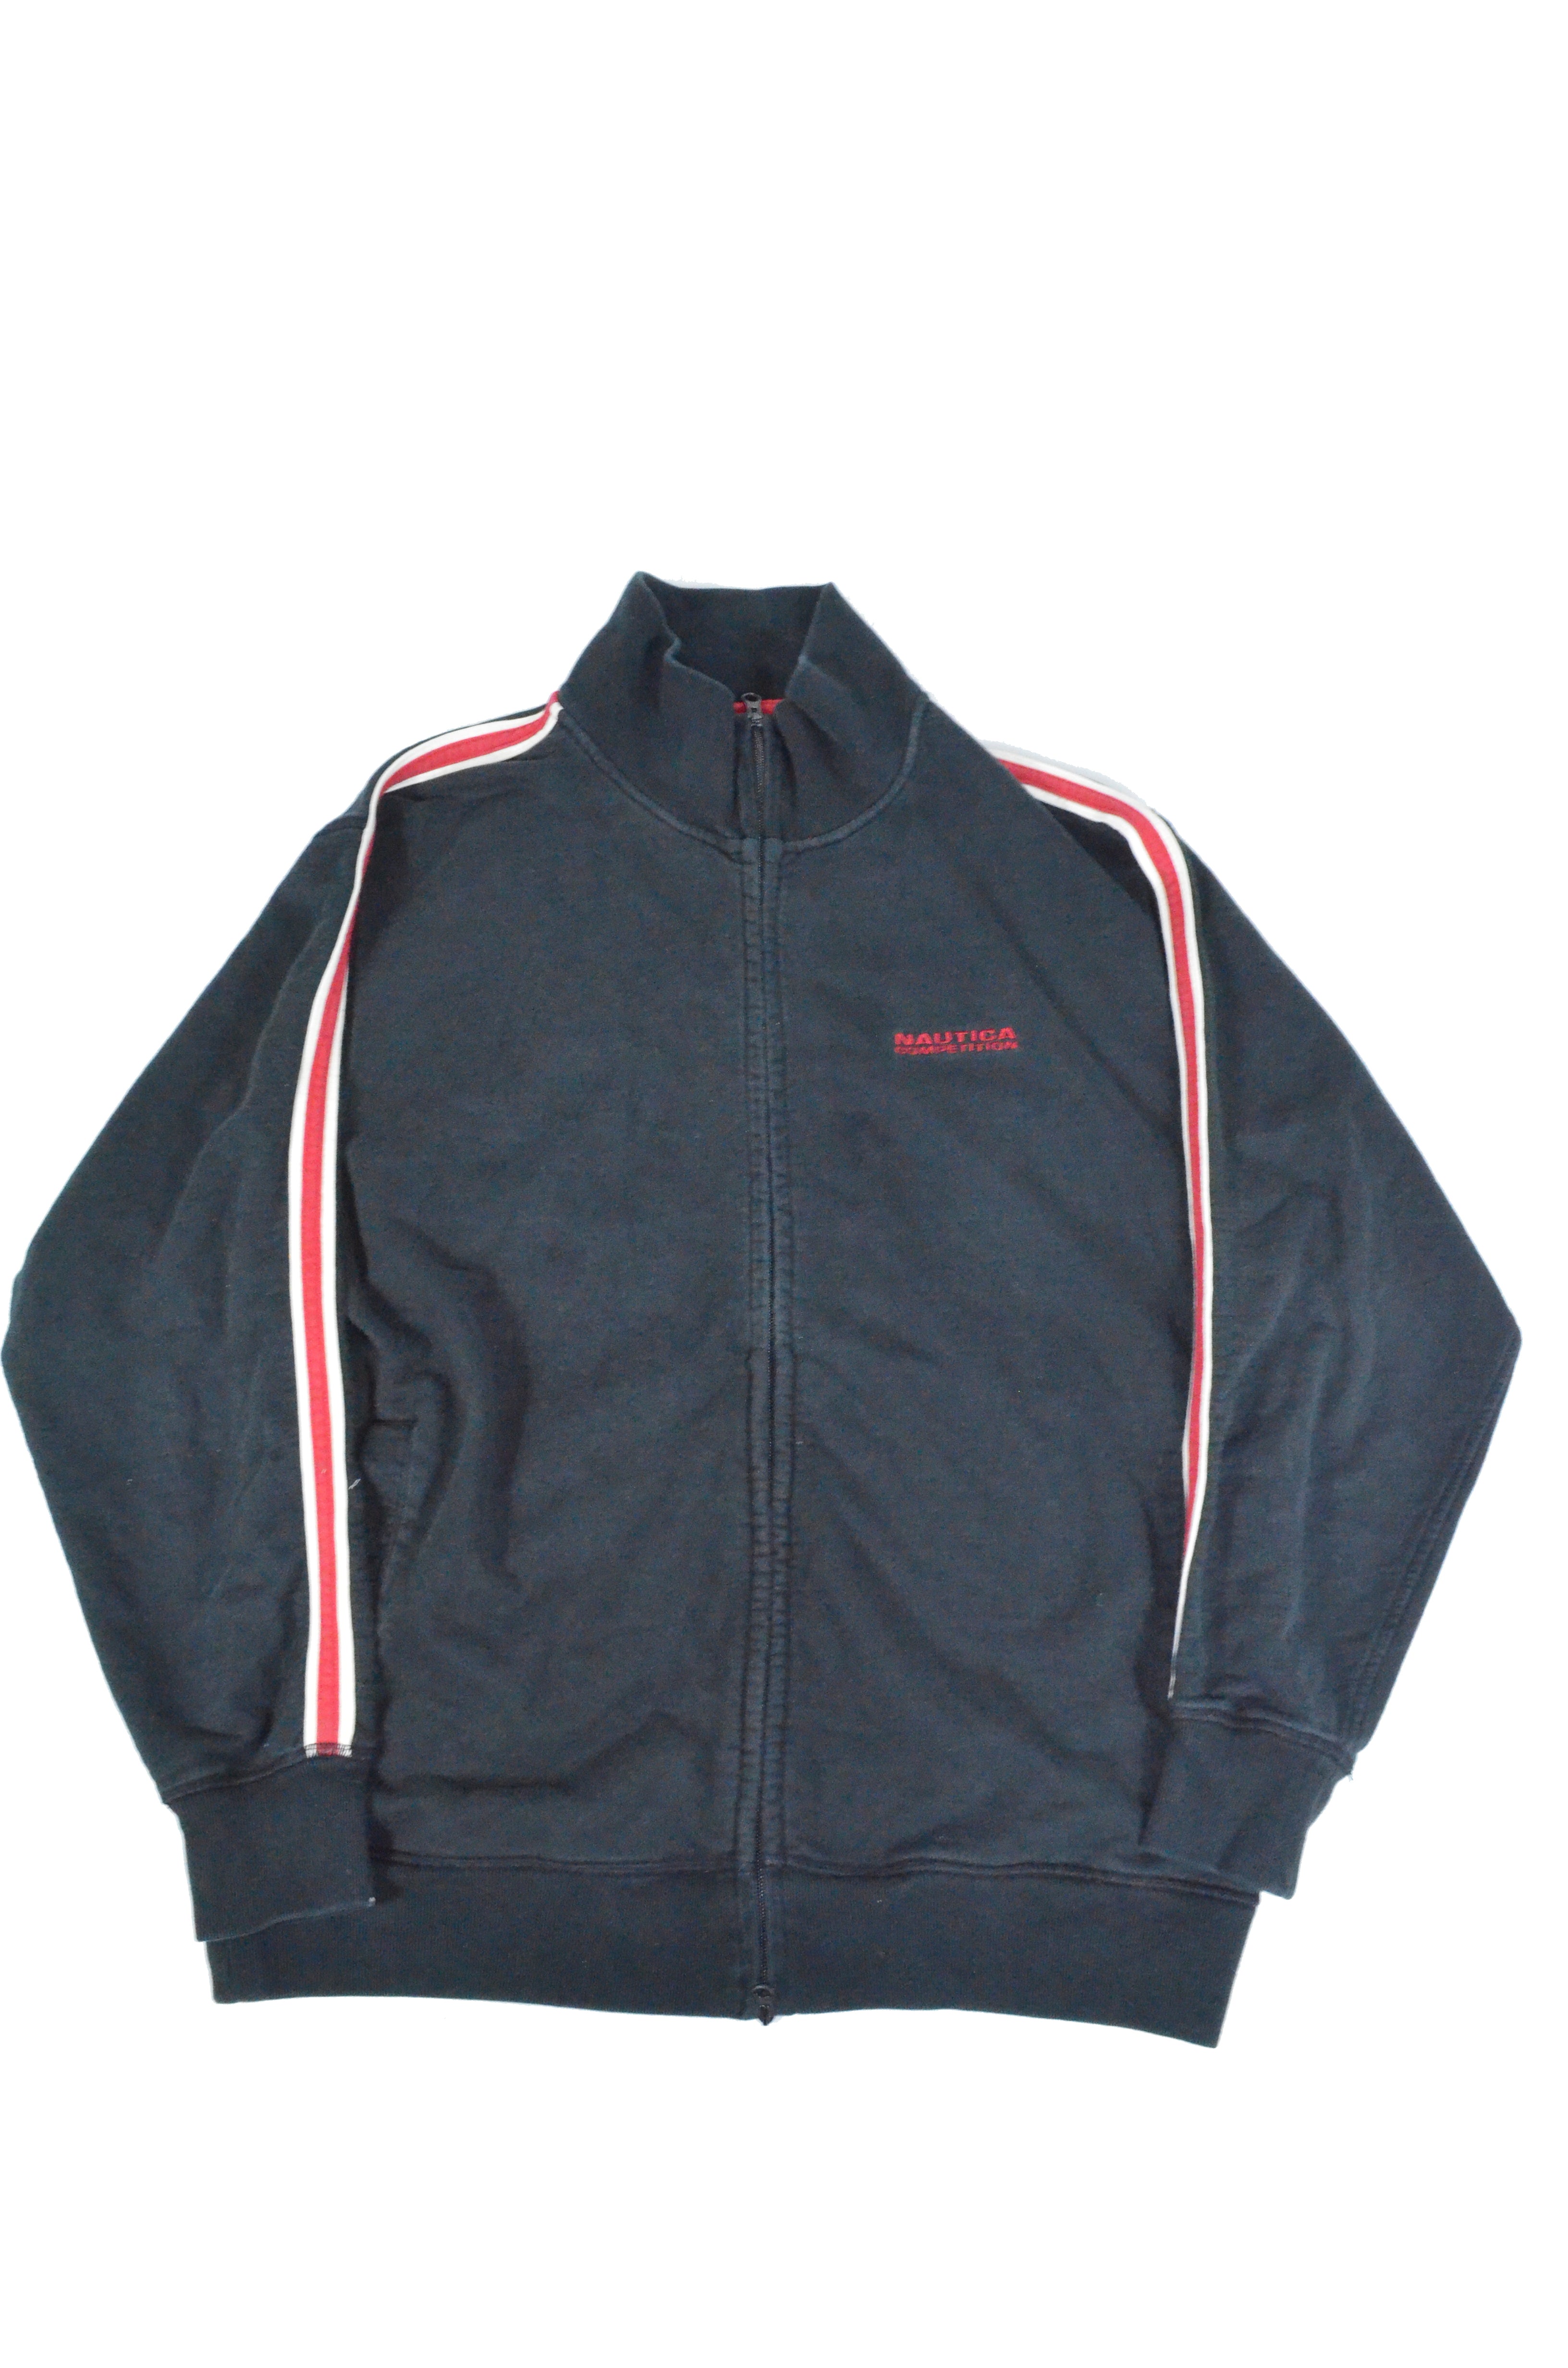 Nautica Competition Track Jacket